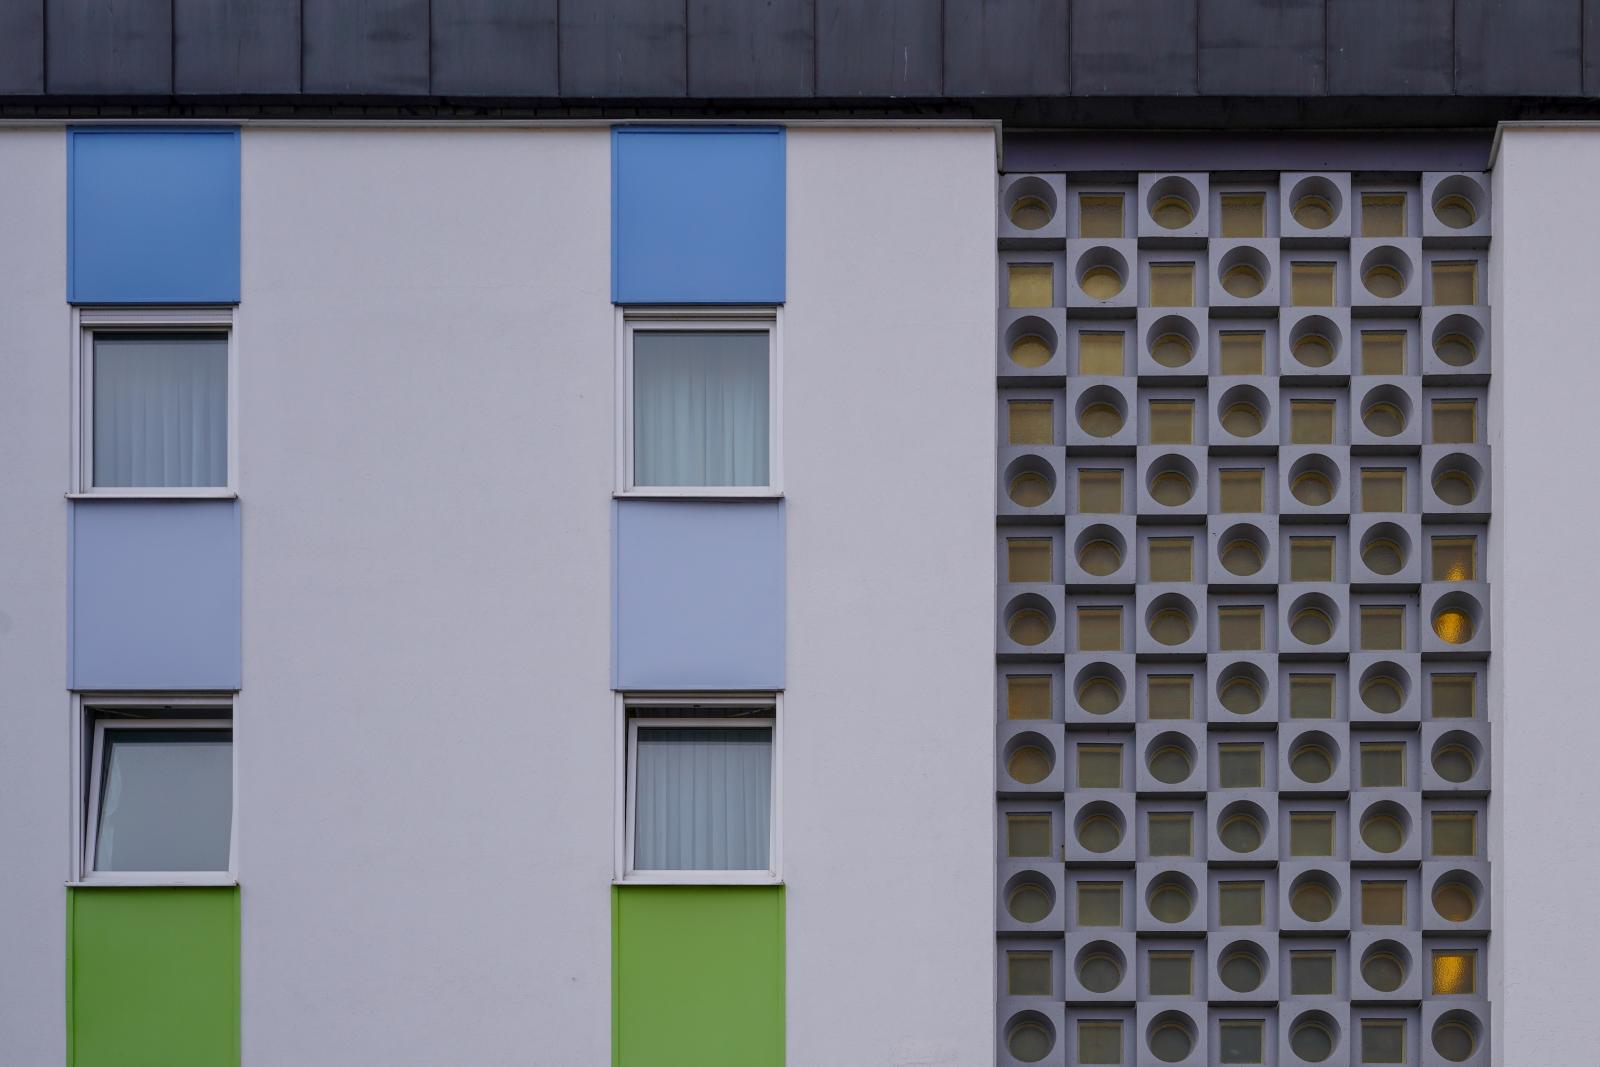 Image from New Photographs -  Kaufbeuren, Germany  # 4173 2/2024 Geometry of...